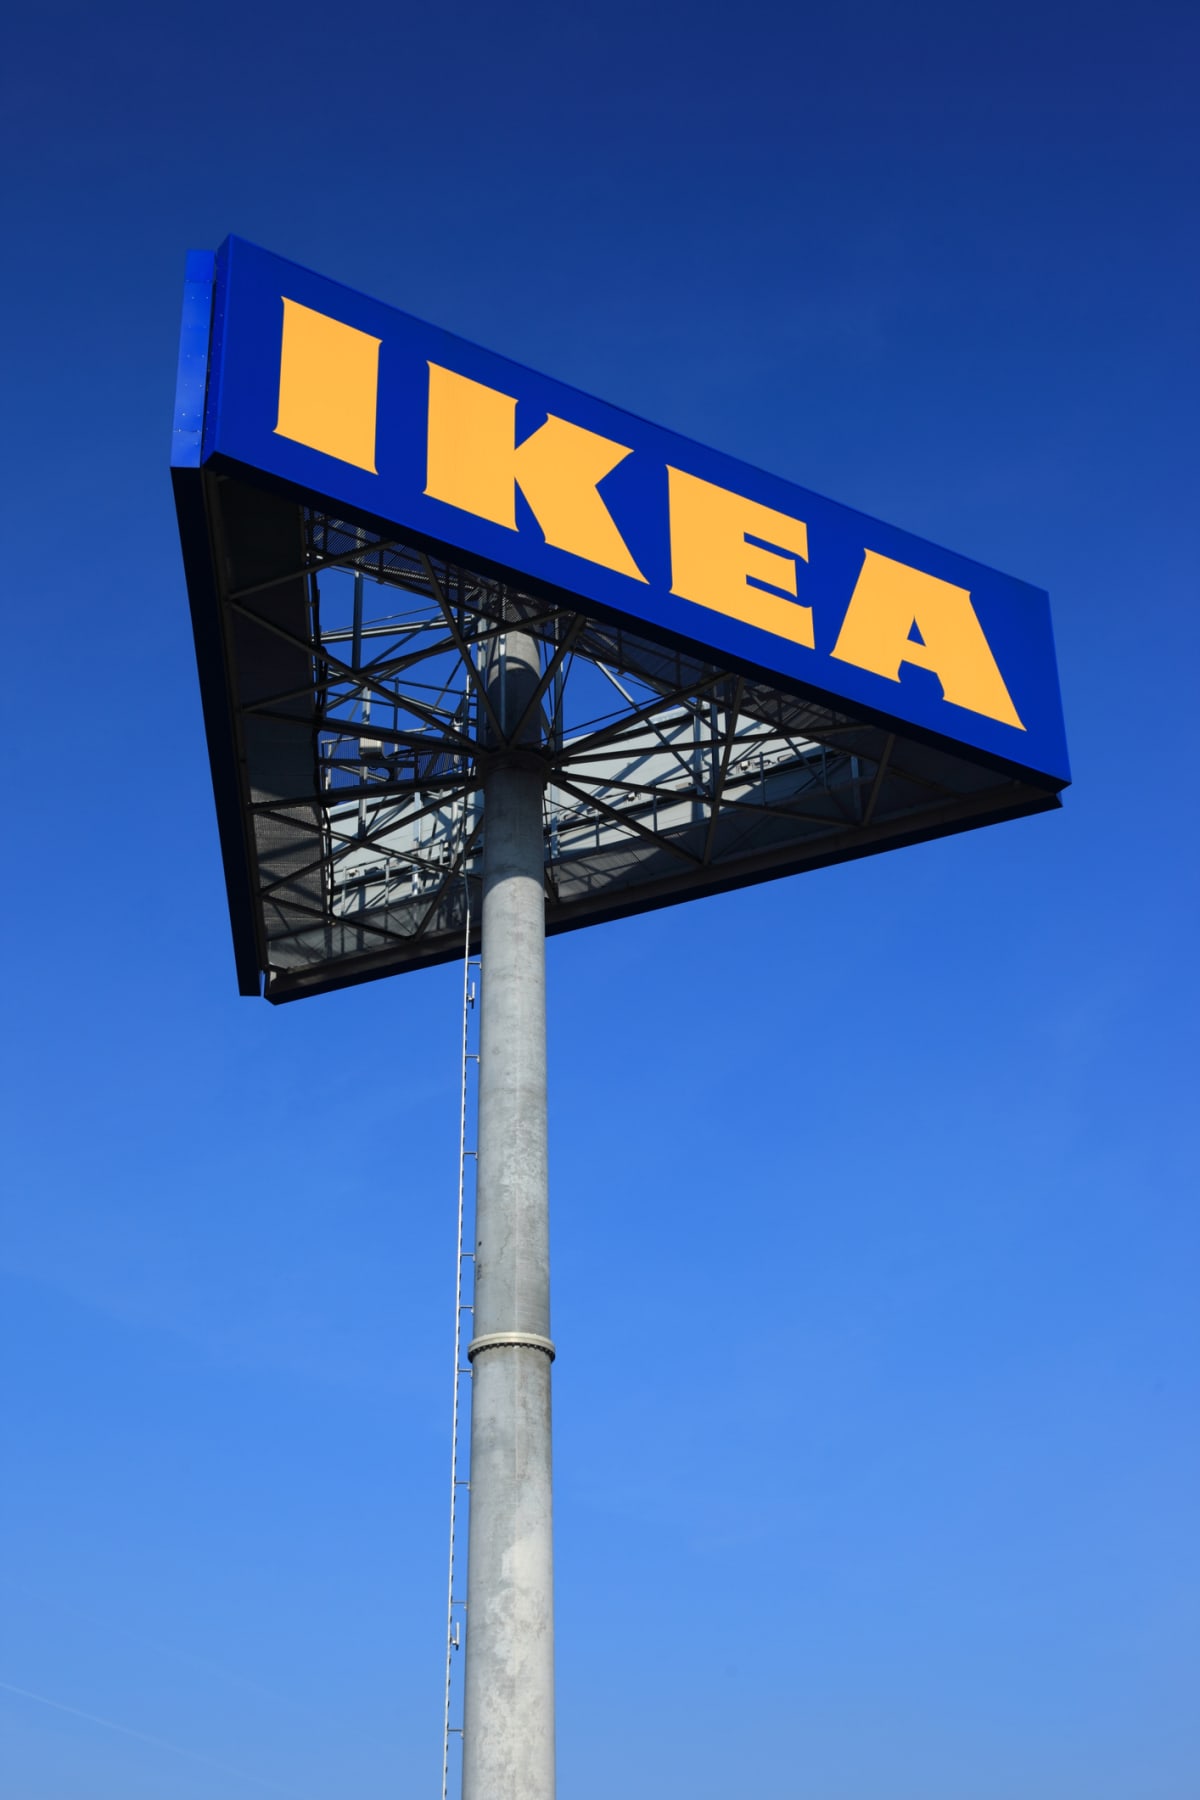 Ikea sign against bright blue sky